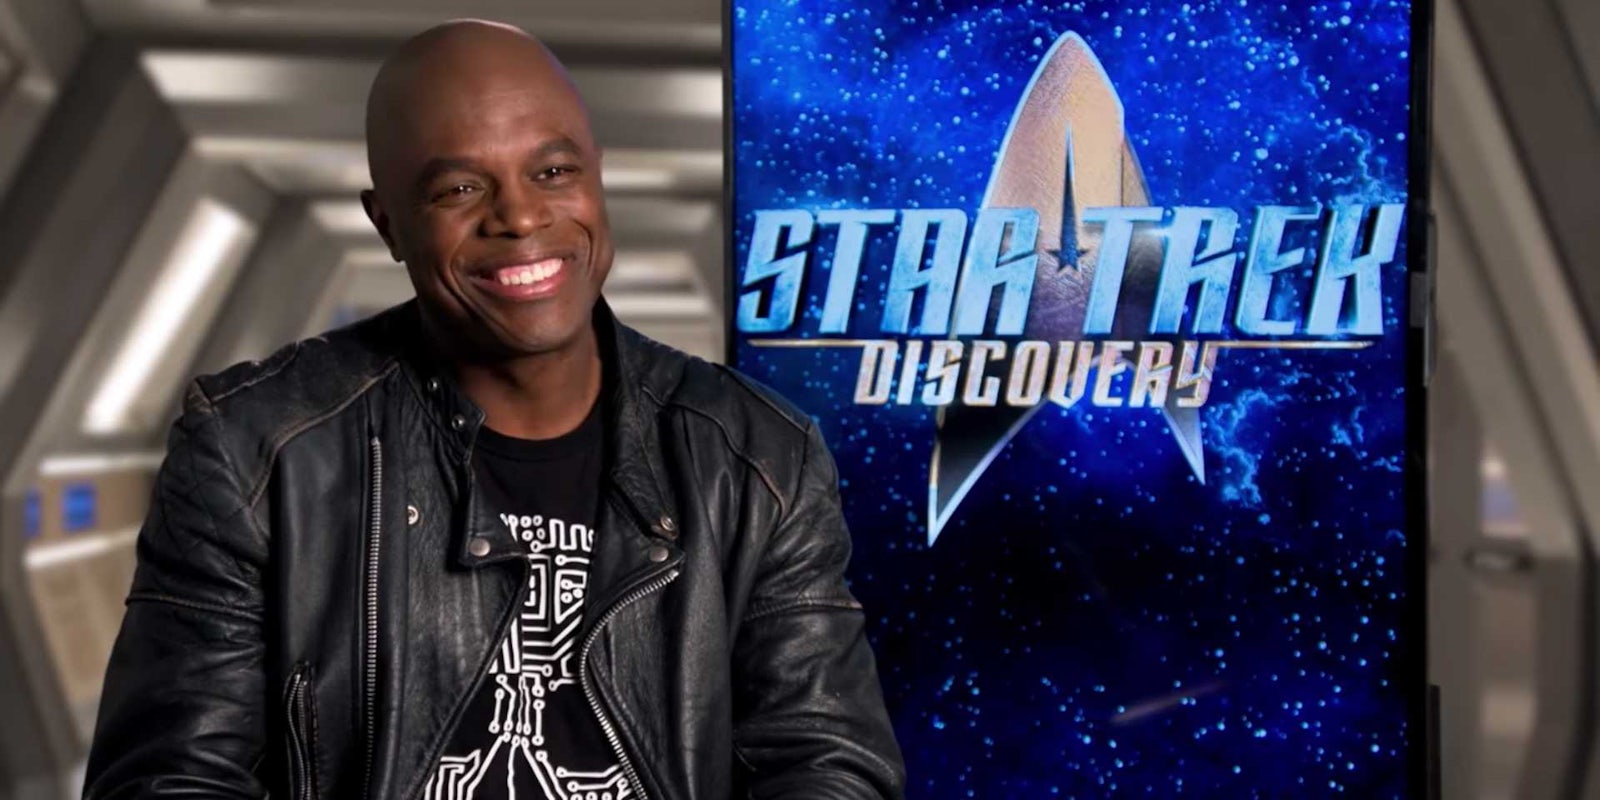 Star Trek Discover actor Chris Obi smiles during an interview in front of a Star Trek banner